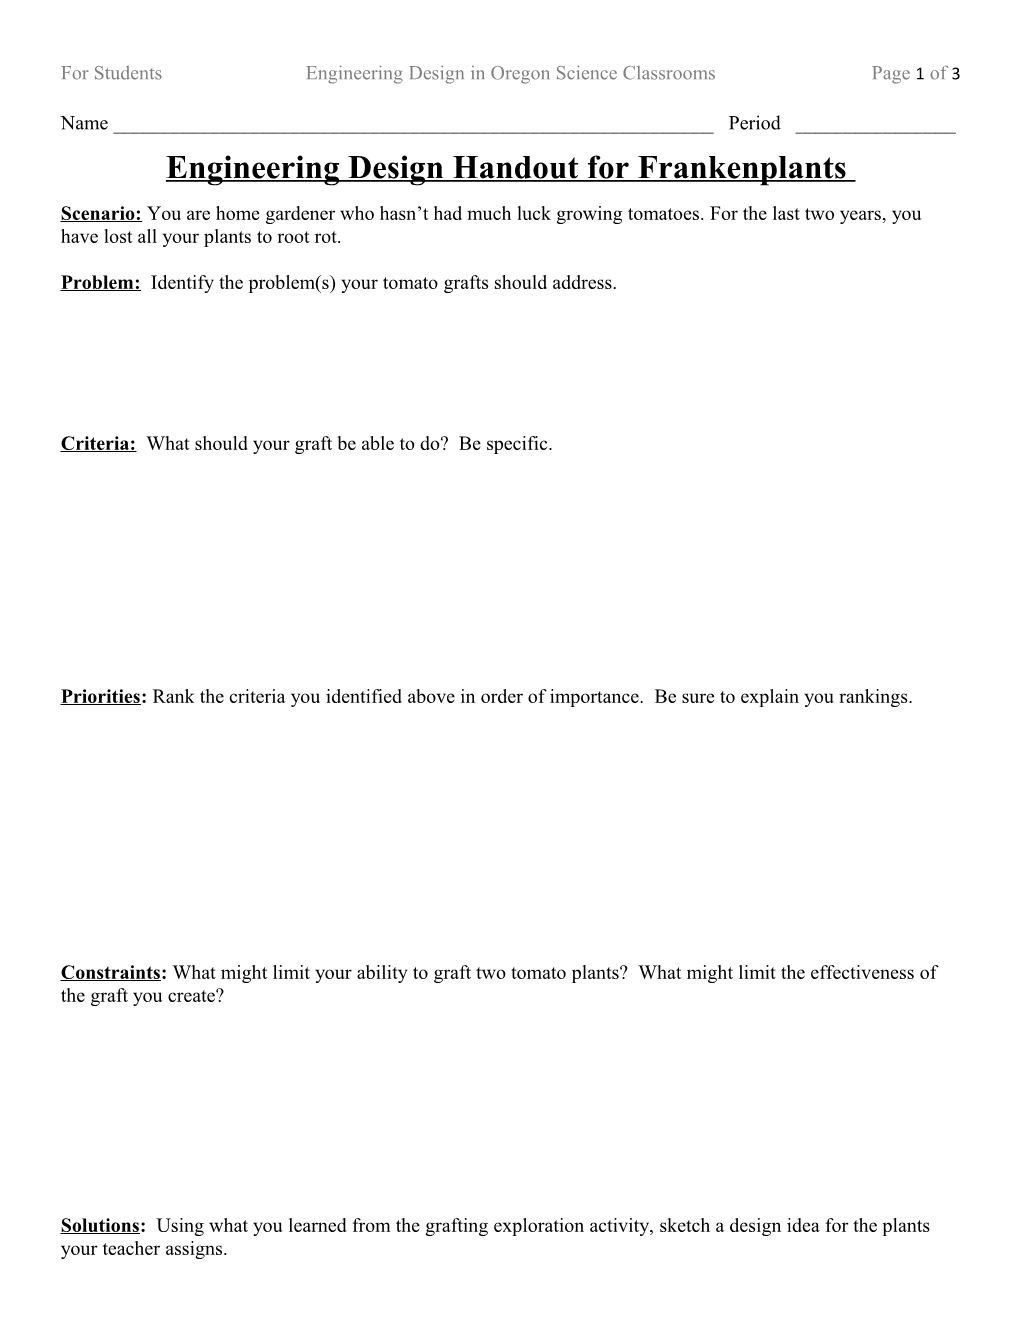 For Studentsengineering Design in Oregon Science Classroomspage 1 of 3